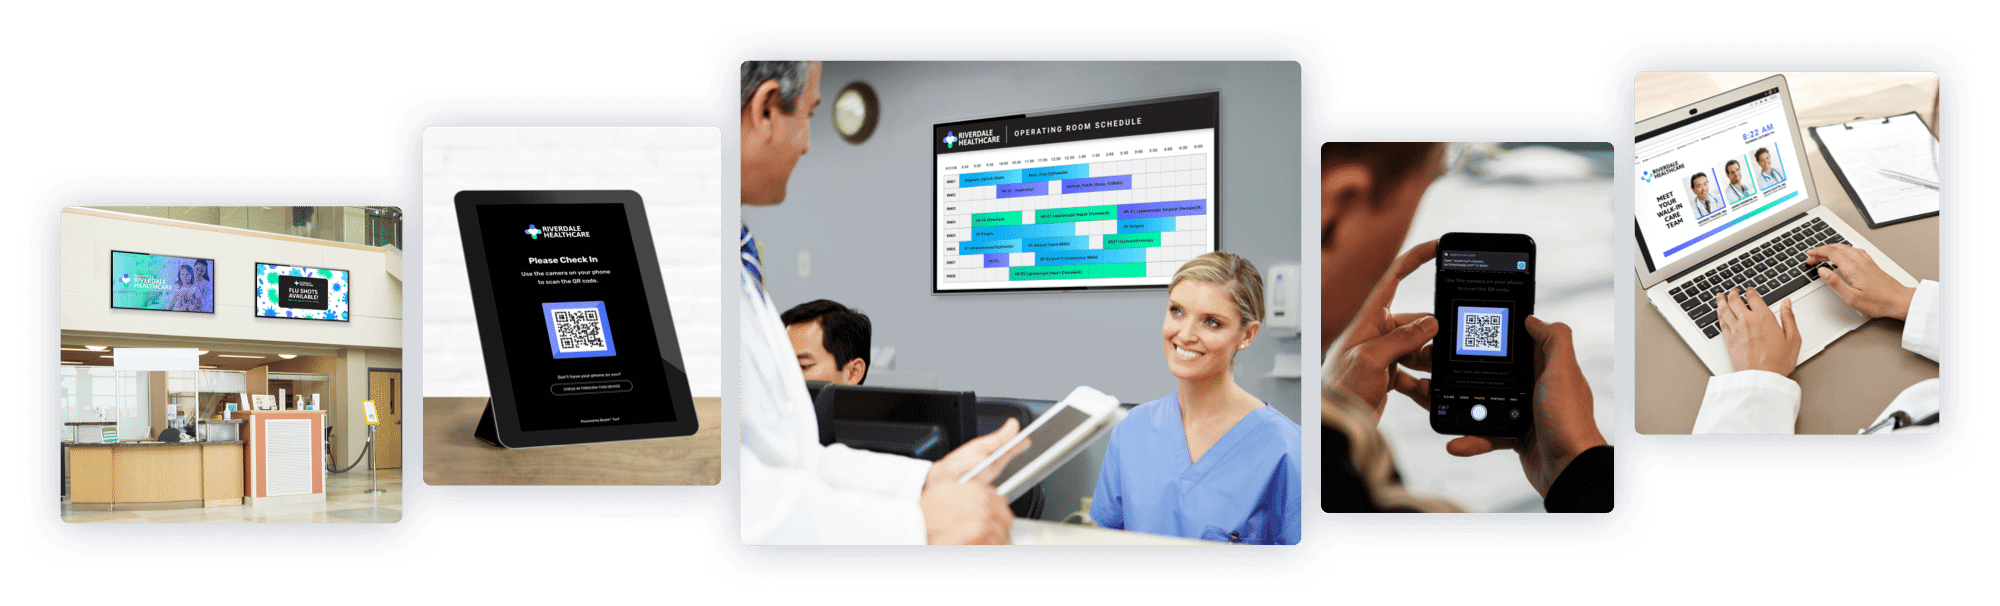 Skykit Beam Digital Signage Content Management Solution For Healthcare and Hospitals